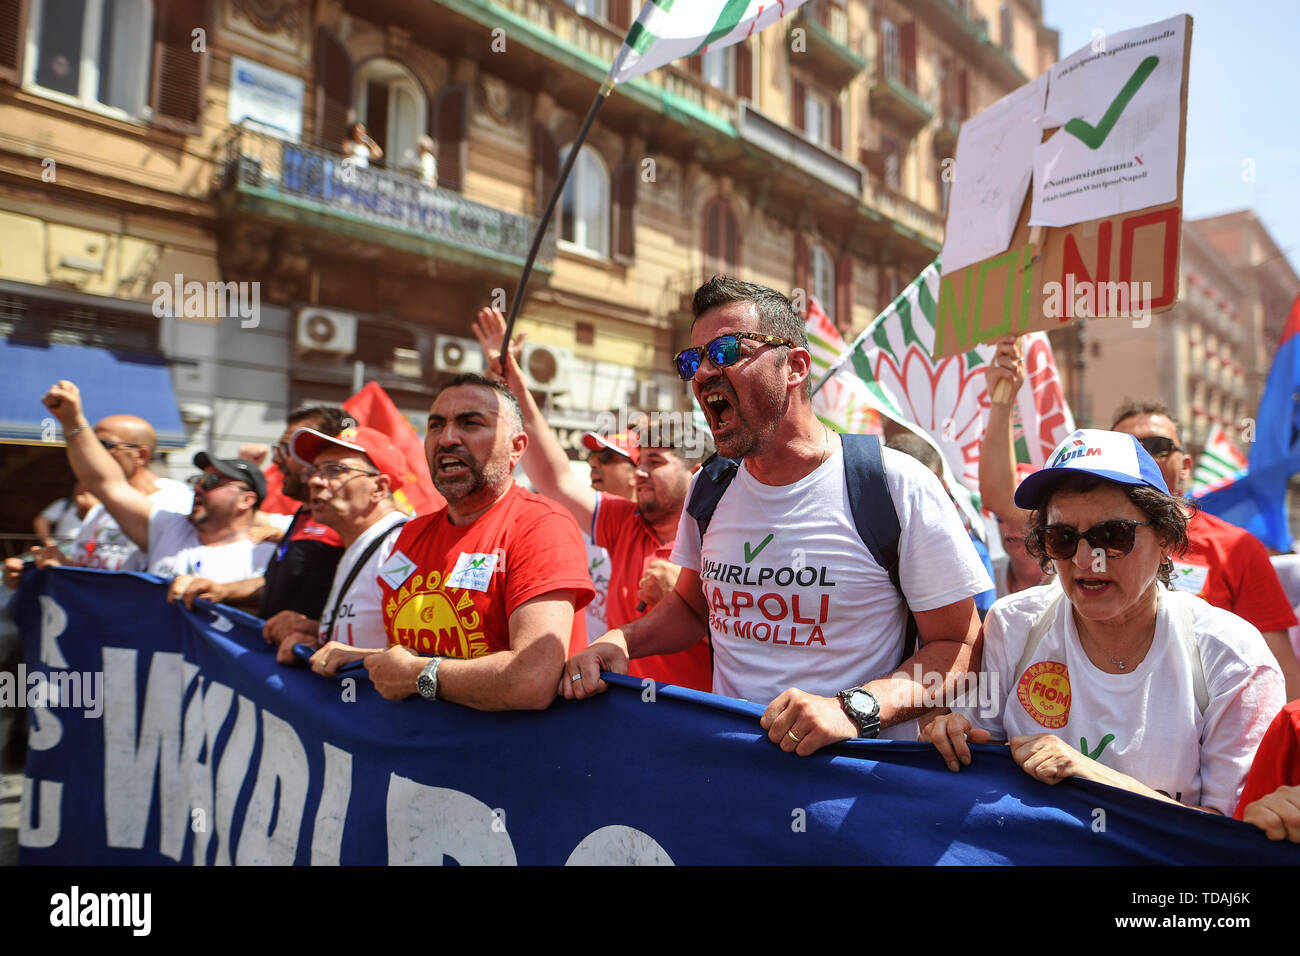 General strike of metalworkers adhering to the FIOM CGIL CISL acronyms held in Naples with whirpool workers at the head of the court. 14/06/2019, Naples, Italy Stock Photo